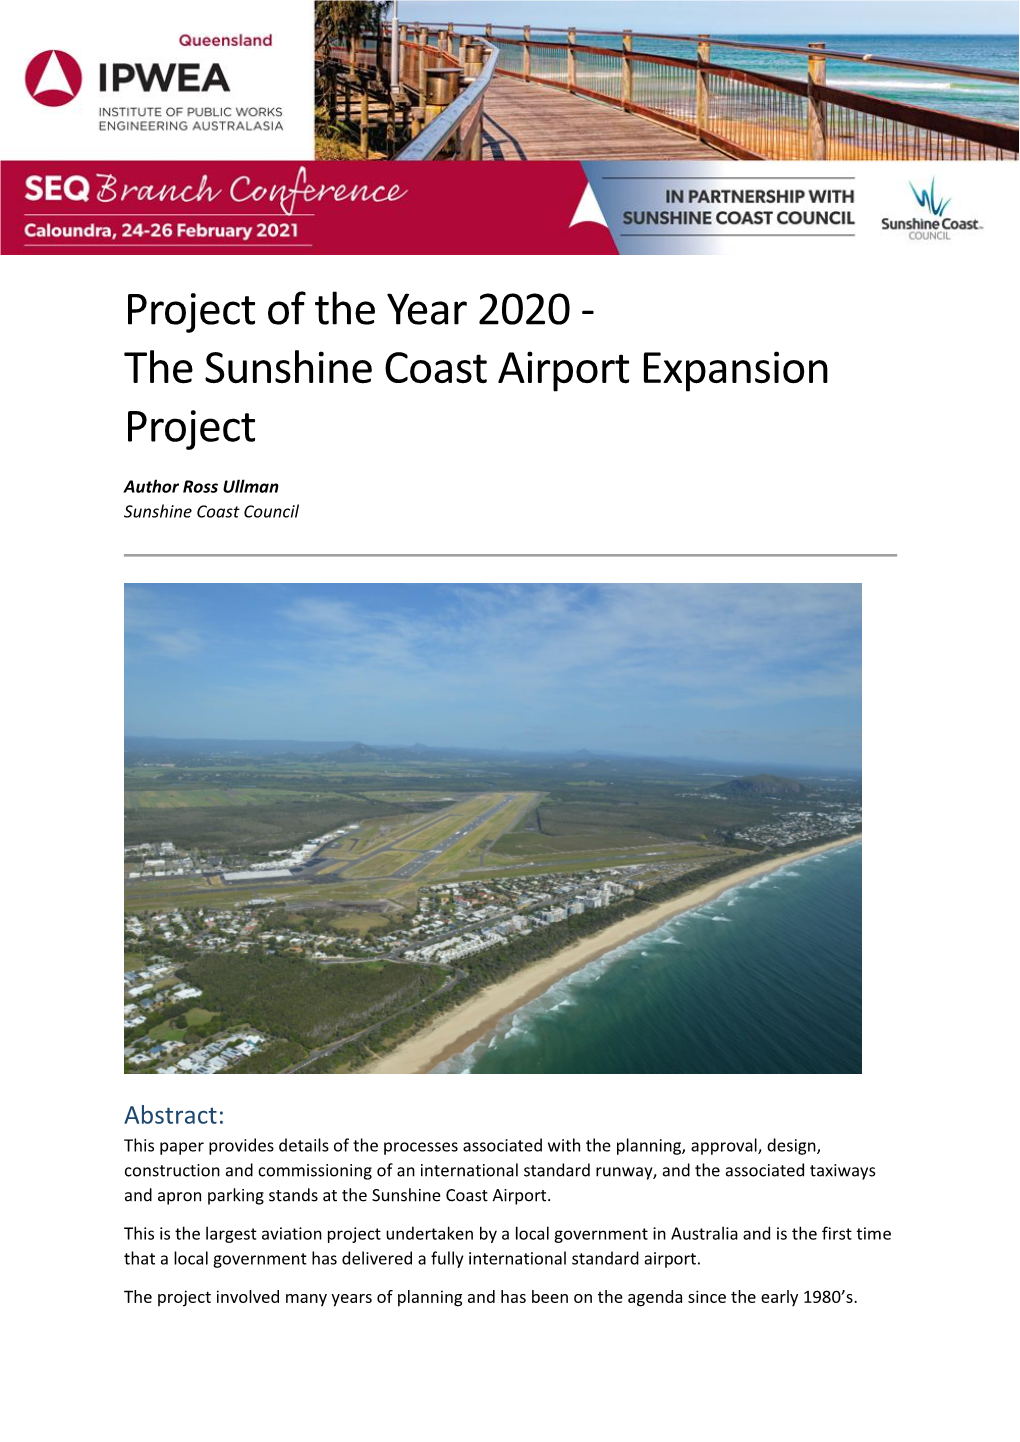 The Sunshine Coast Airport Expansion Project